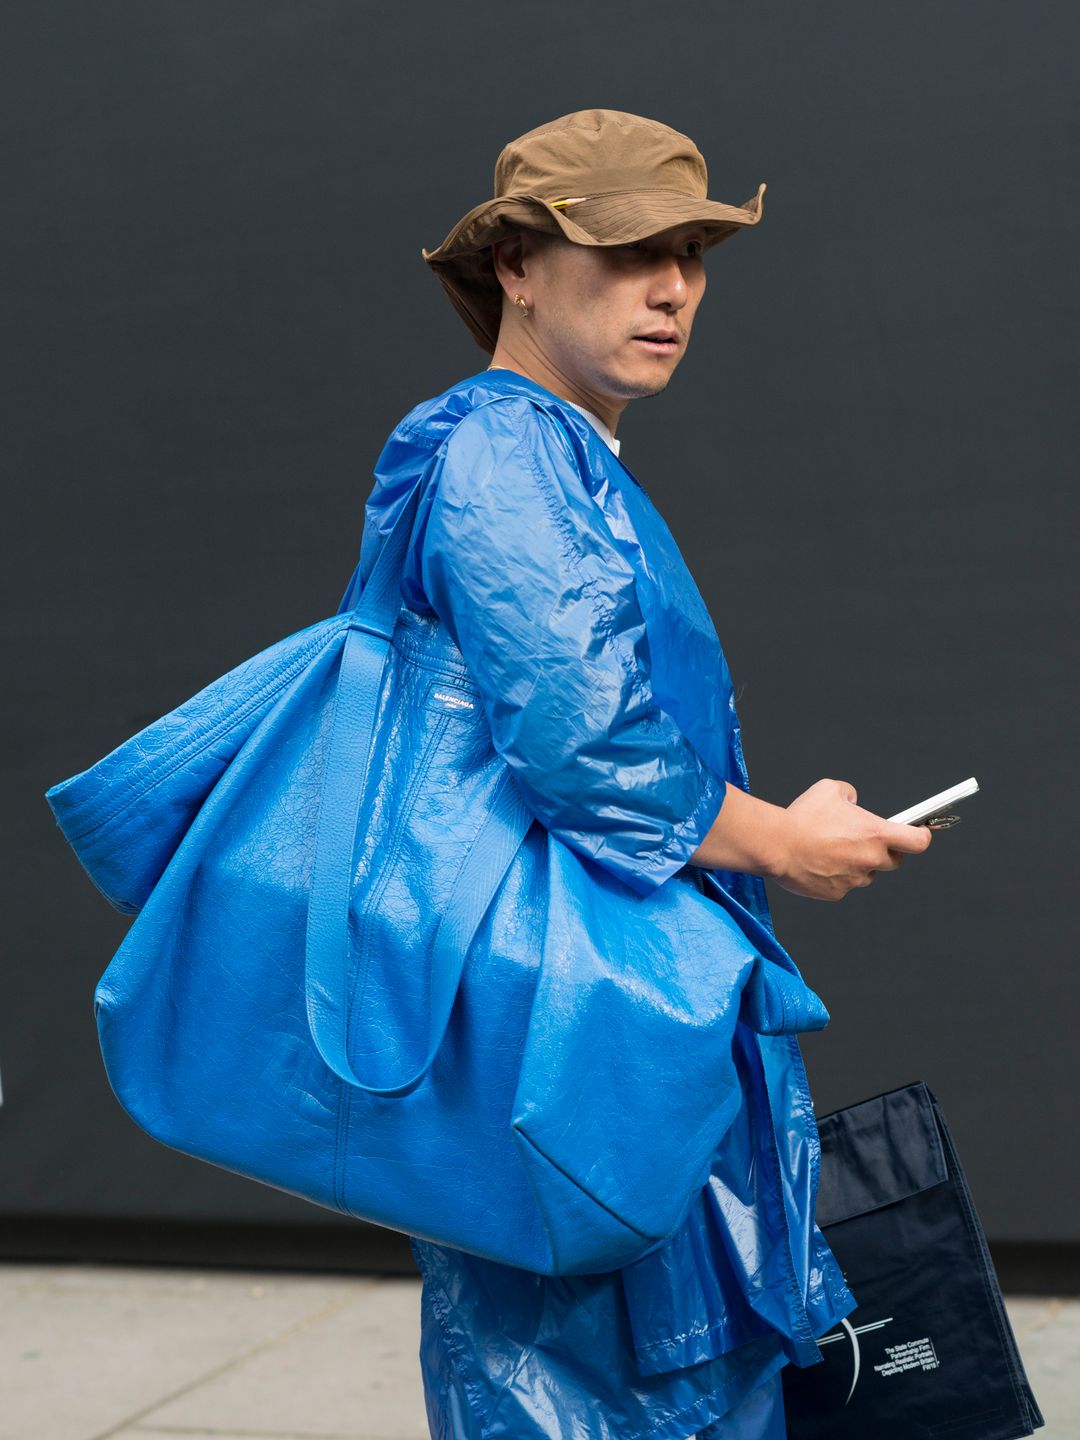 A guest of Balenciaga's 2017 show wears a blue coat and matching blue bag with a brown hat